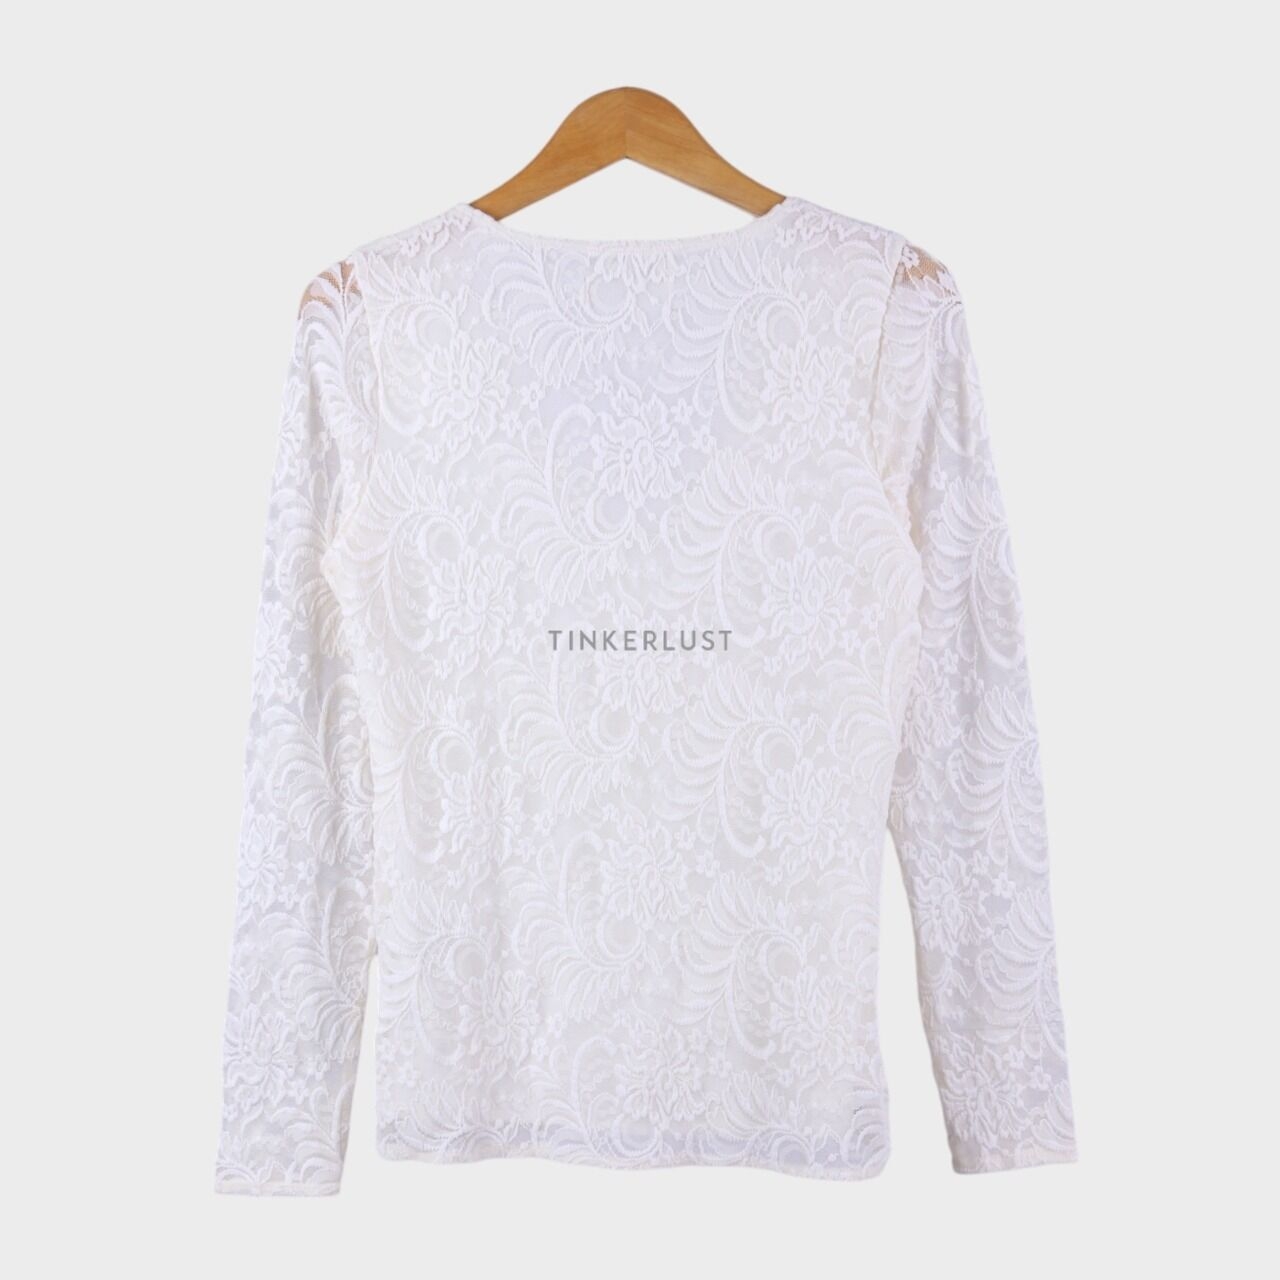 Abercrombie & Fitch Broken White Lace Blouse